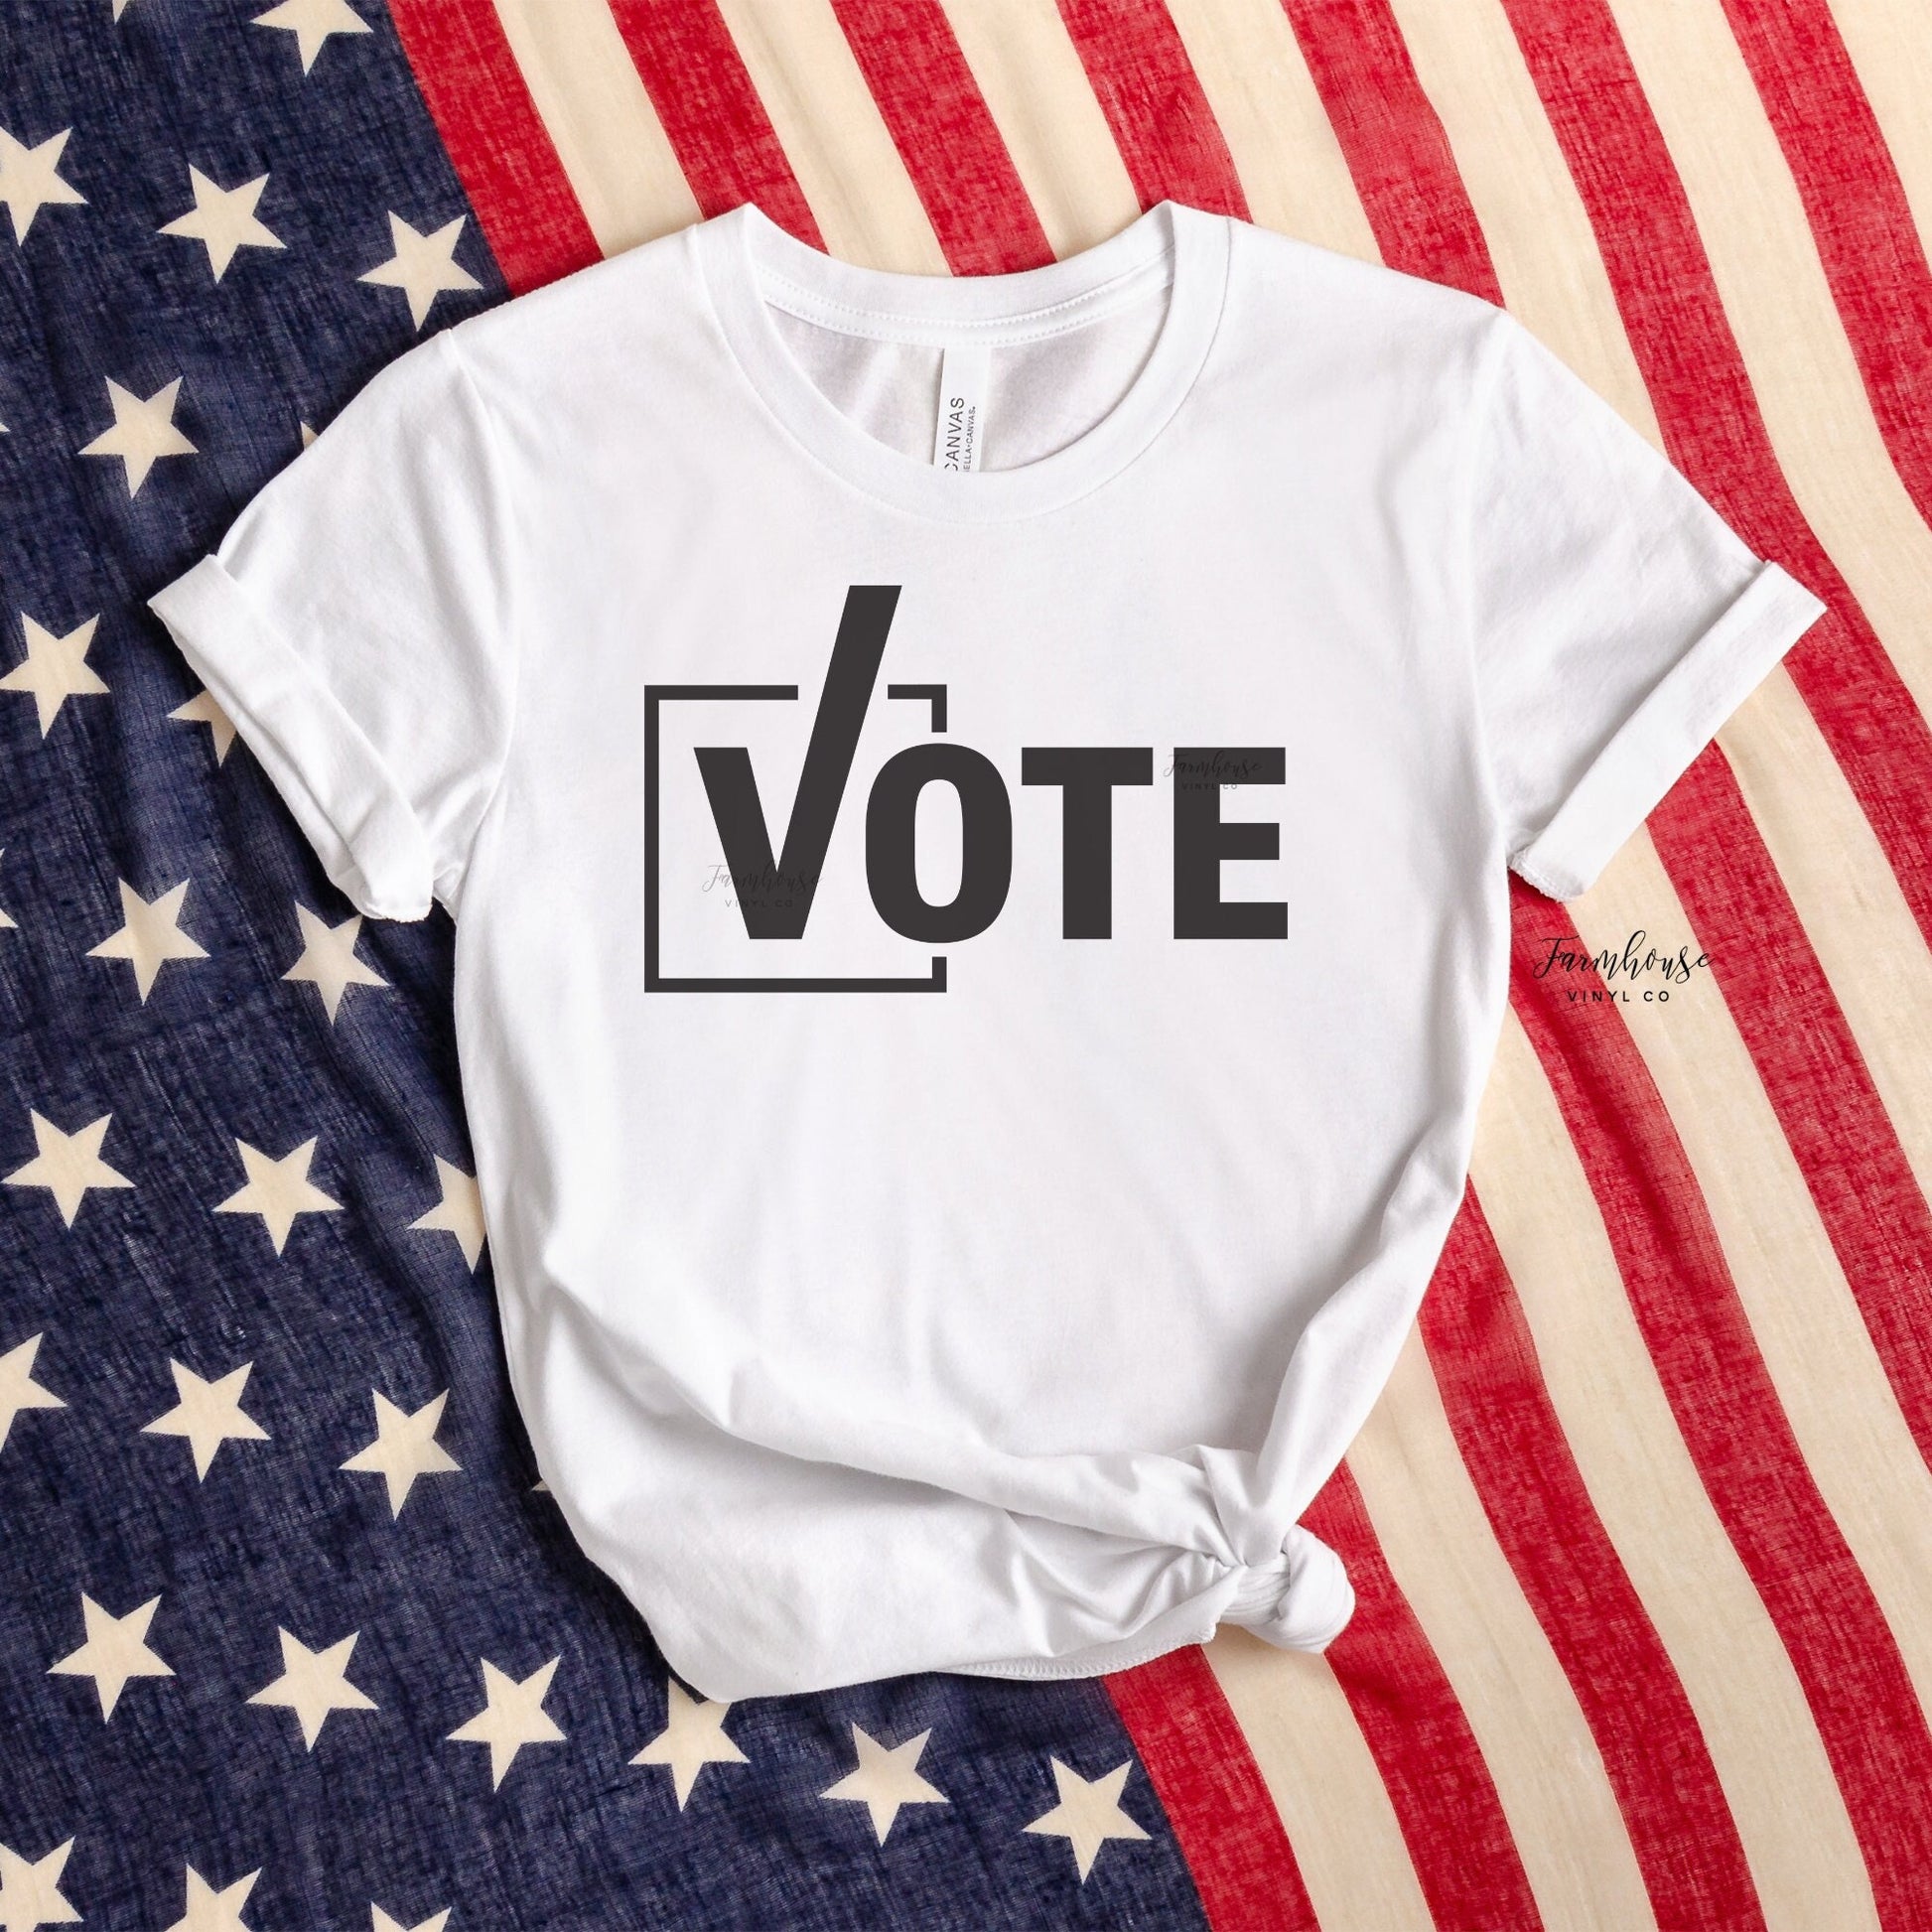 Vote Shirt / Social Justice Shirt / Election Day 2022 Shirt / 2024 Vote Shirt / Vote Check Shirt  / Vote Like Your Rights Depend On It - Farmhouse Vinyl Co